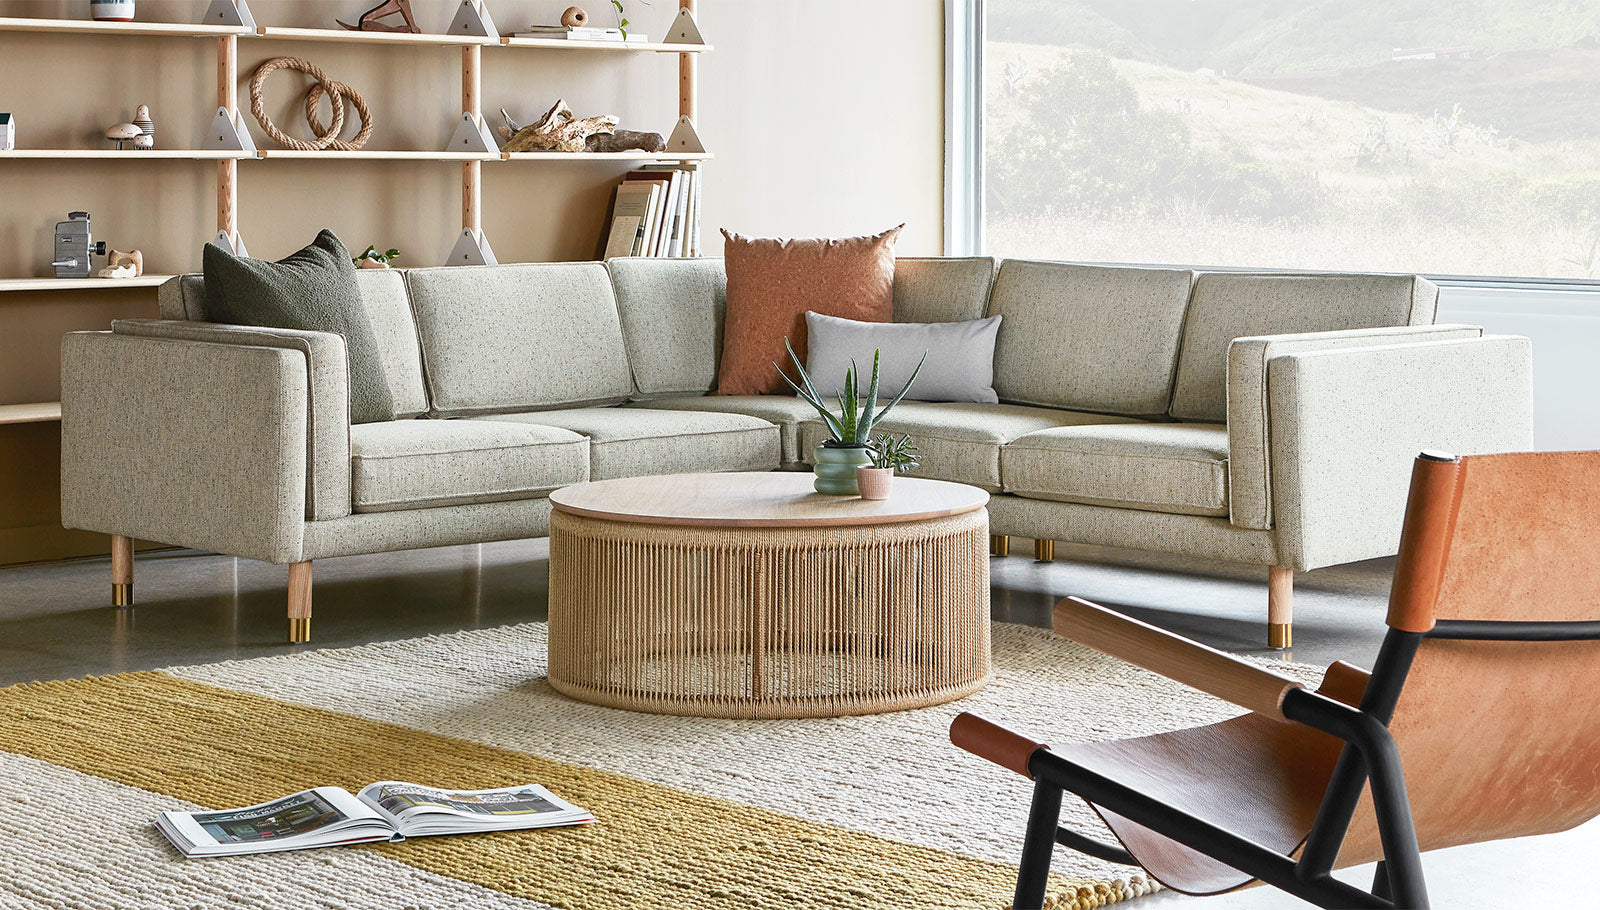 Augusta Bi-Sectional - More Options